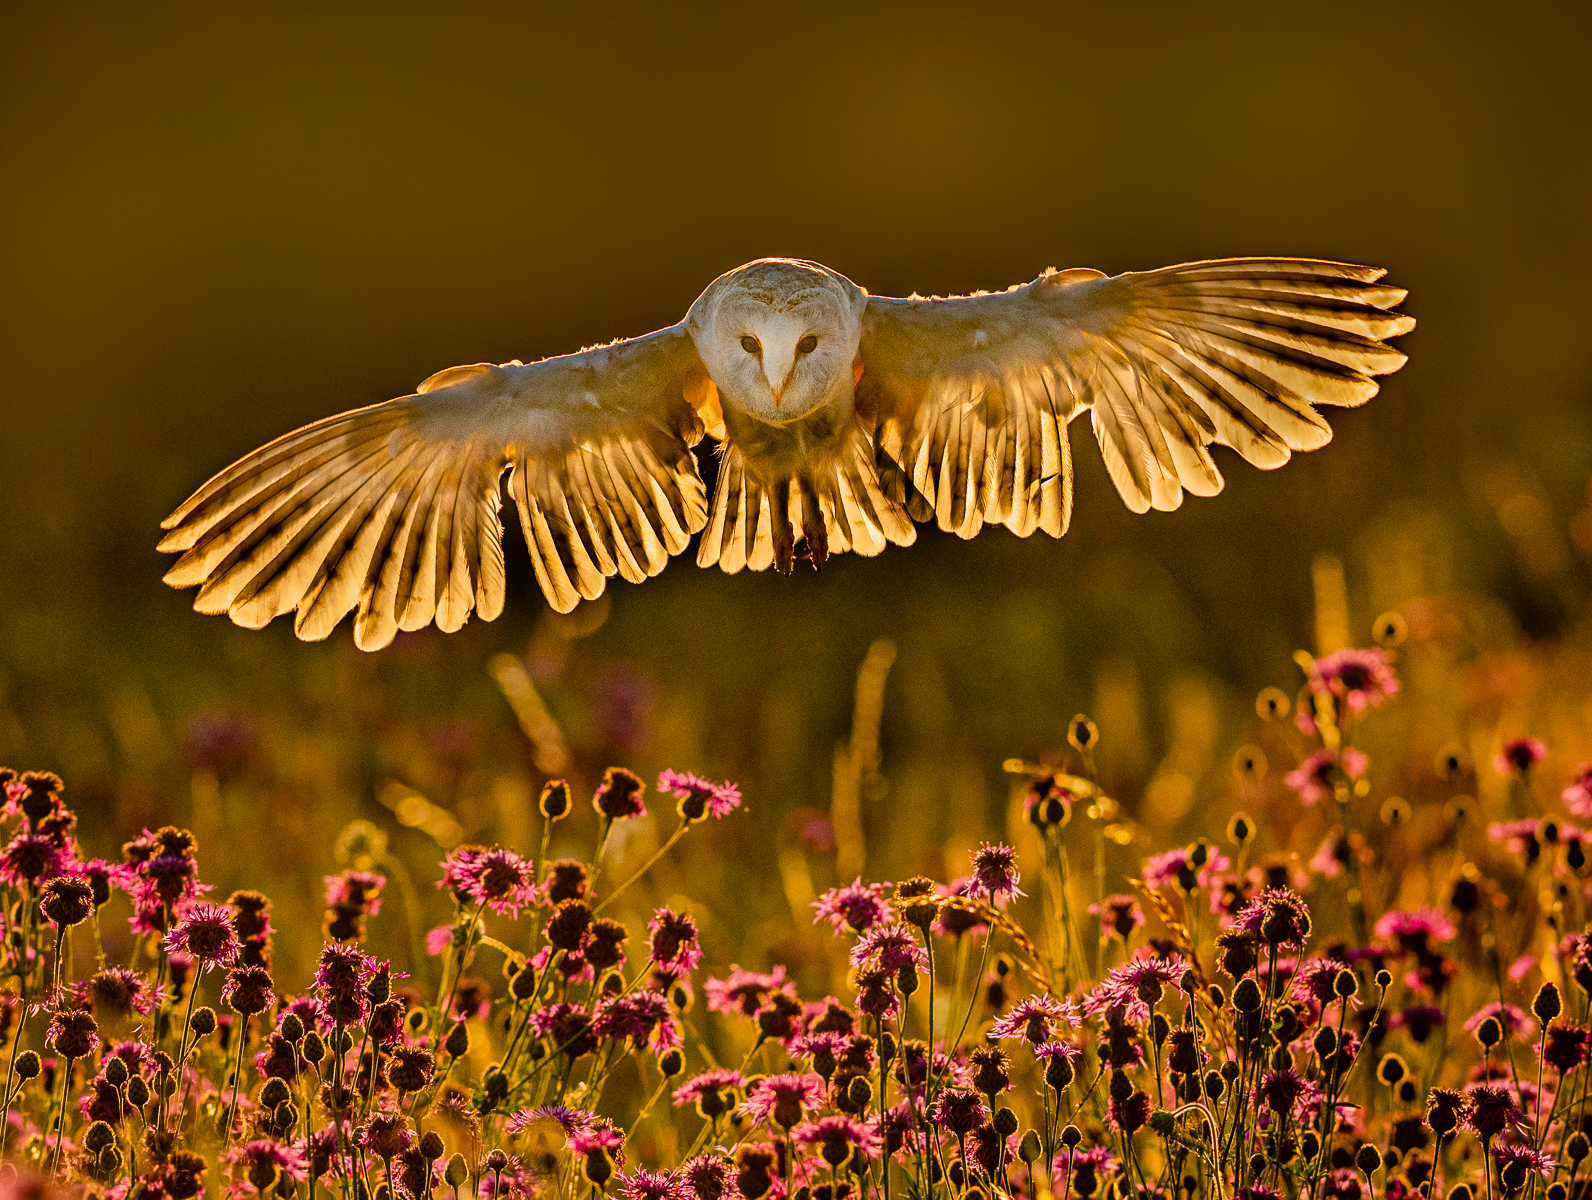 Winning image, Barn Owl Hunting In Late Evening Light by Roger Lickfold